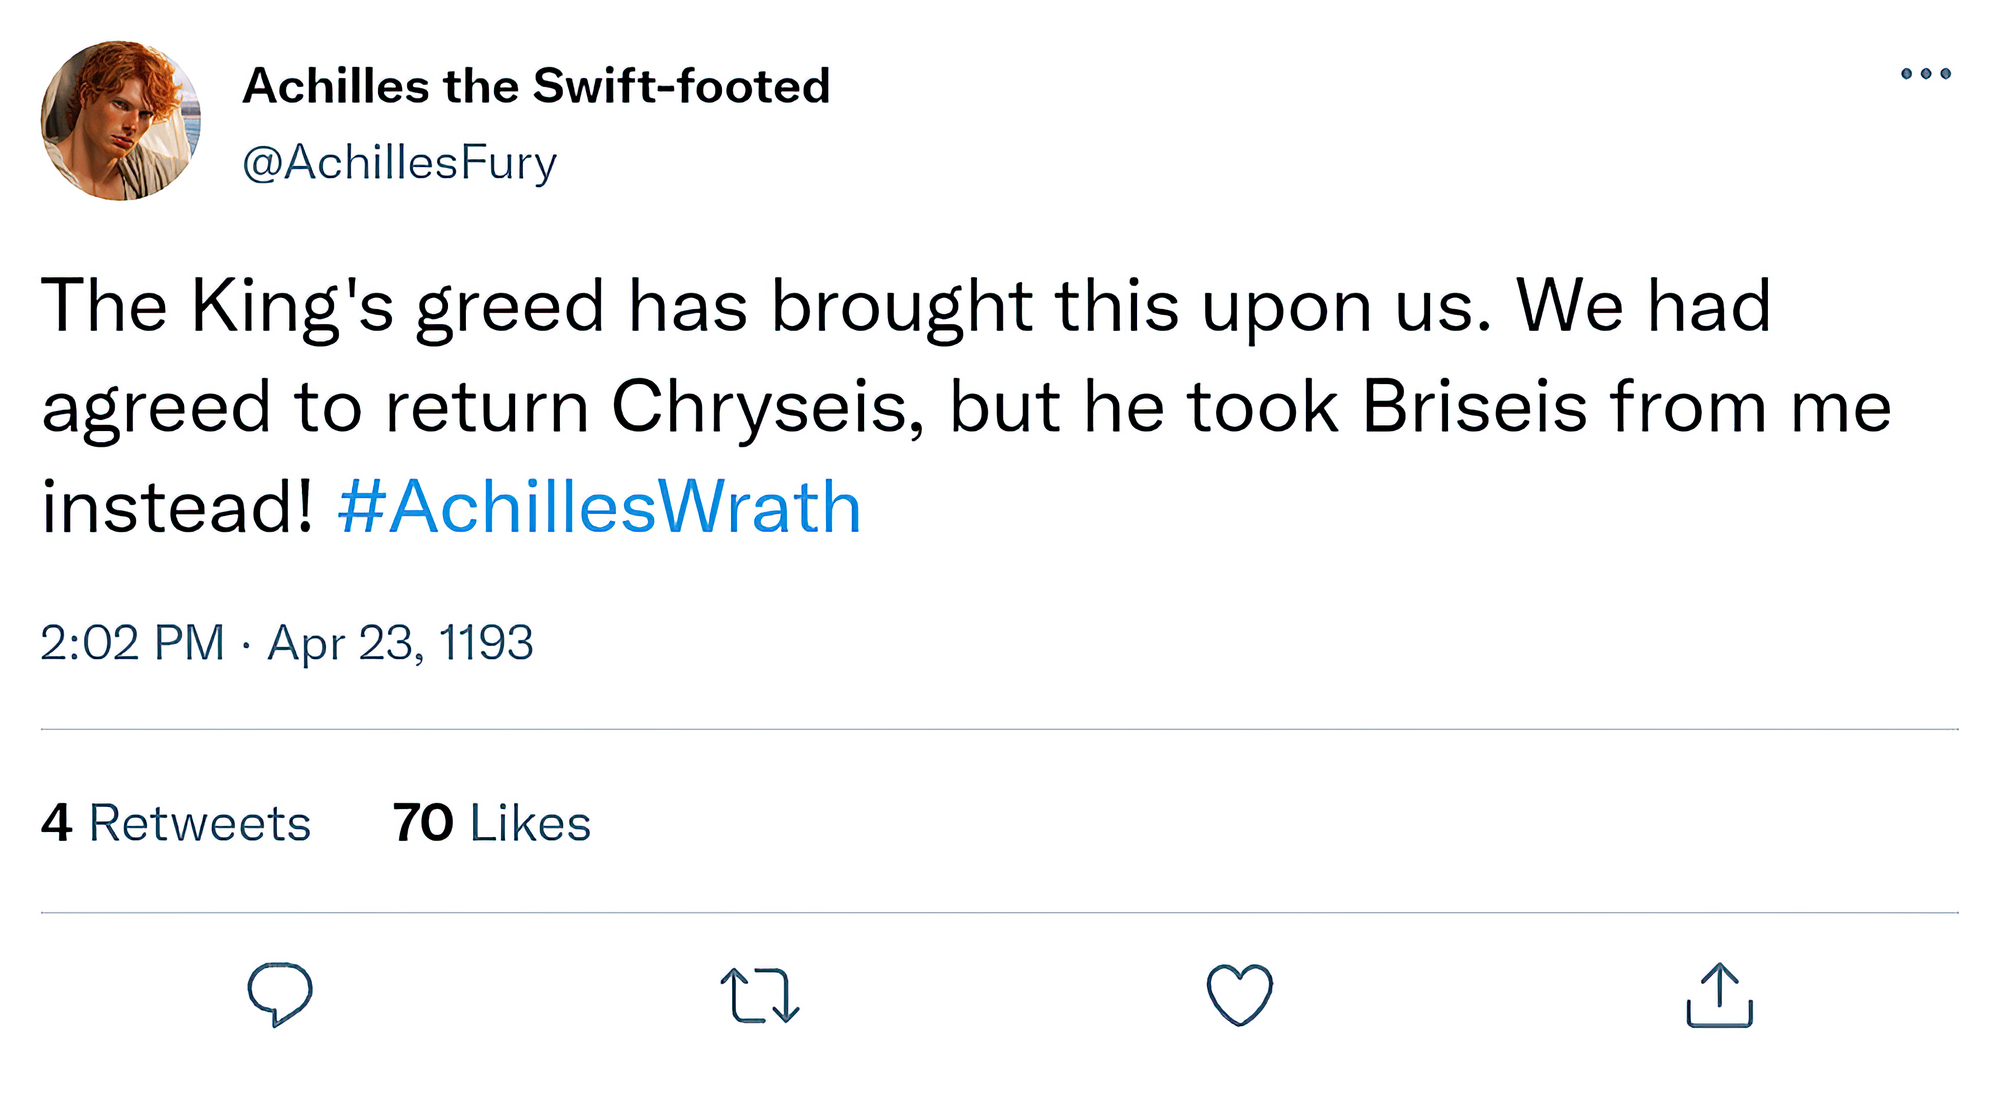 [Tweet] @AchillesFury: "The King's greed has brought this upon us. We had agreed to return Chryseis, but he took Briseis from me instead! #AchillesWrath"